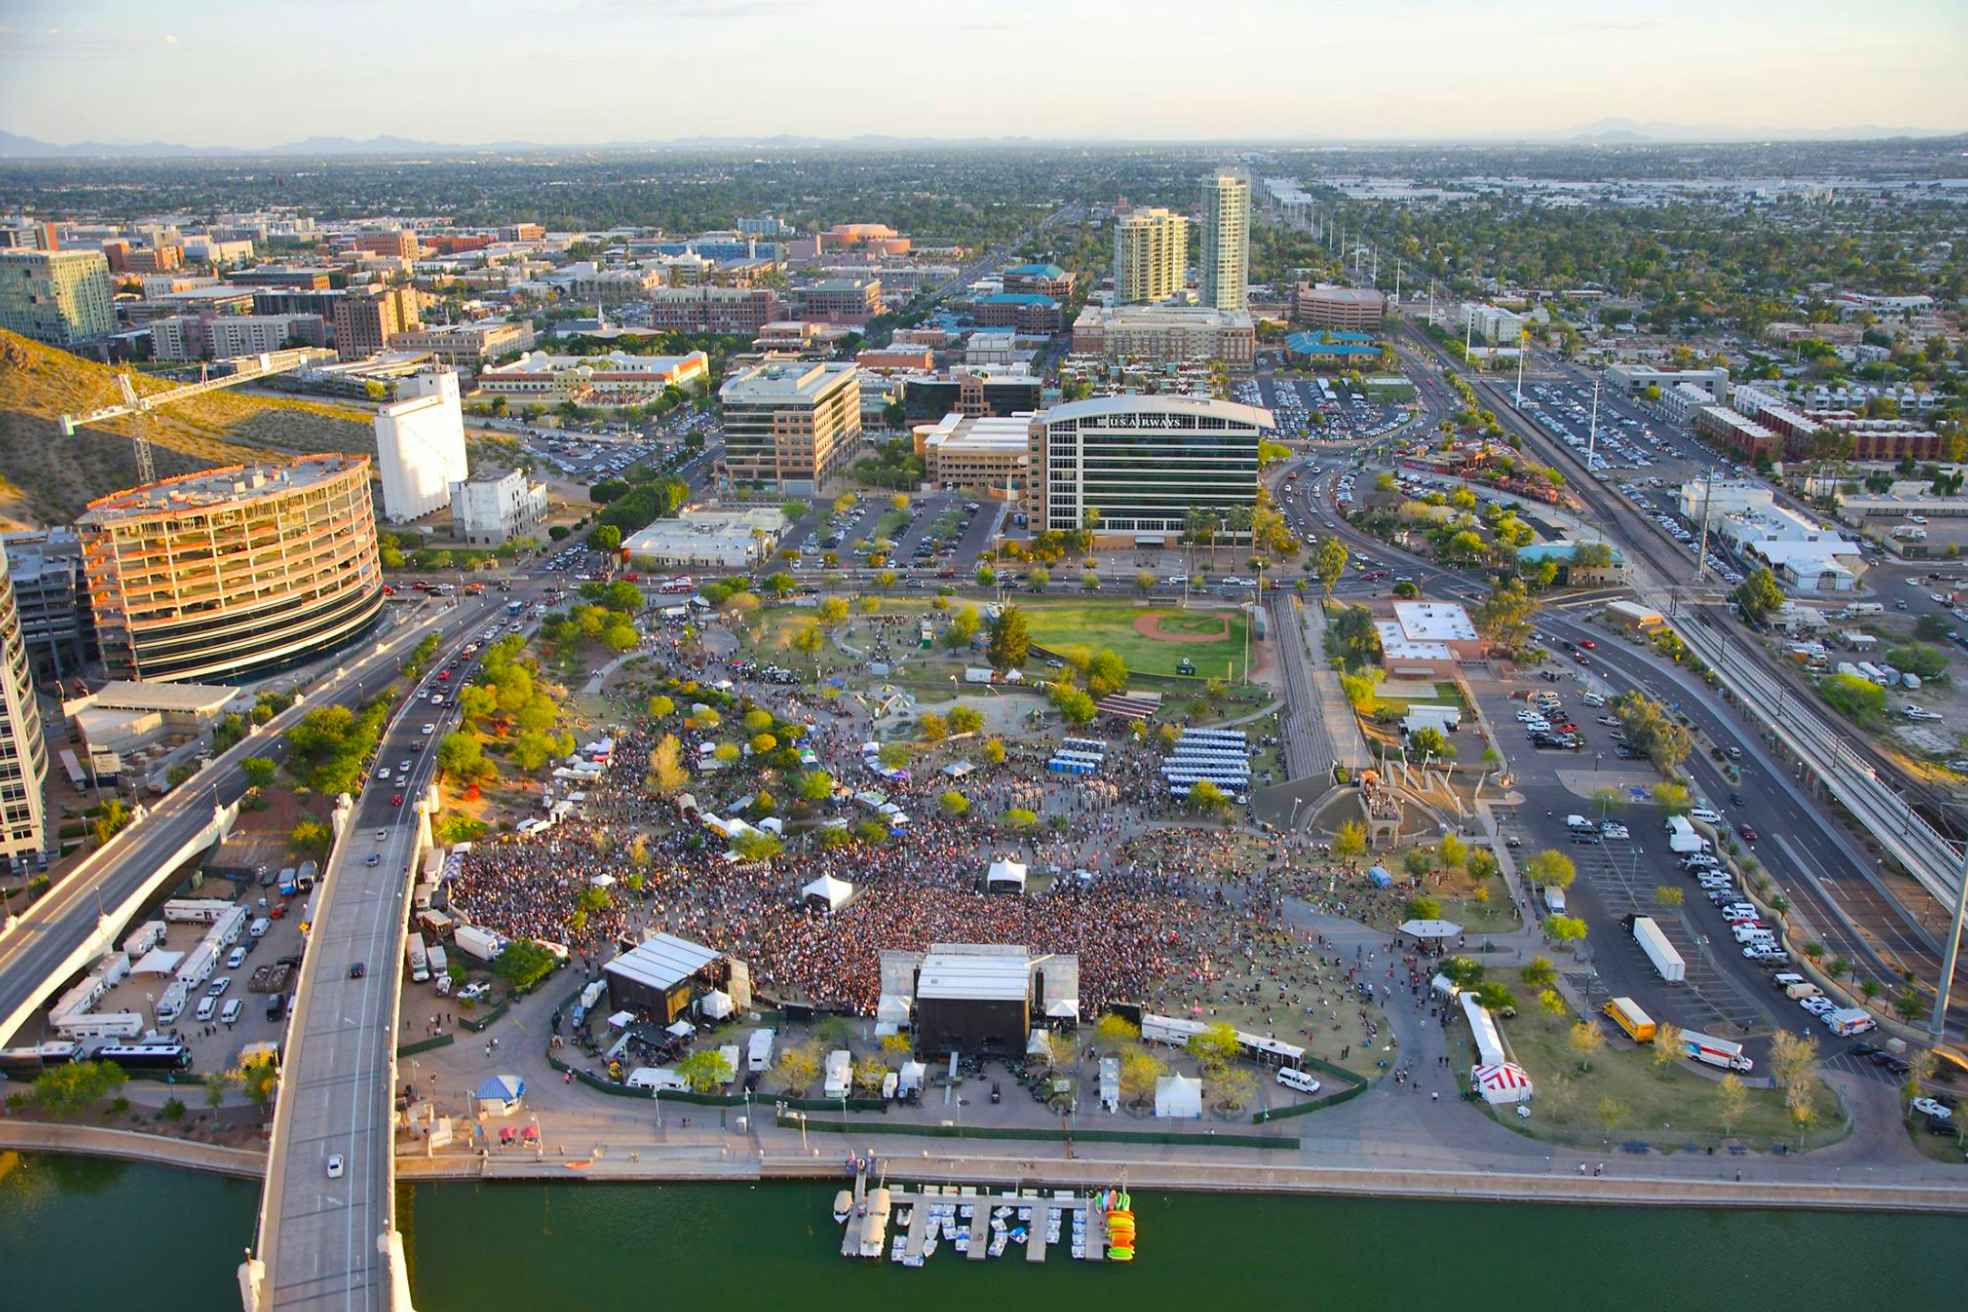 First Timer's Guide To Chandler's Pot Of Gold Music Festival